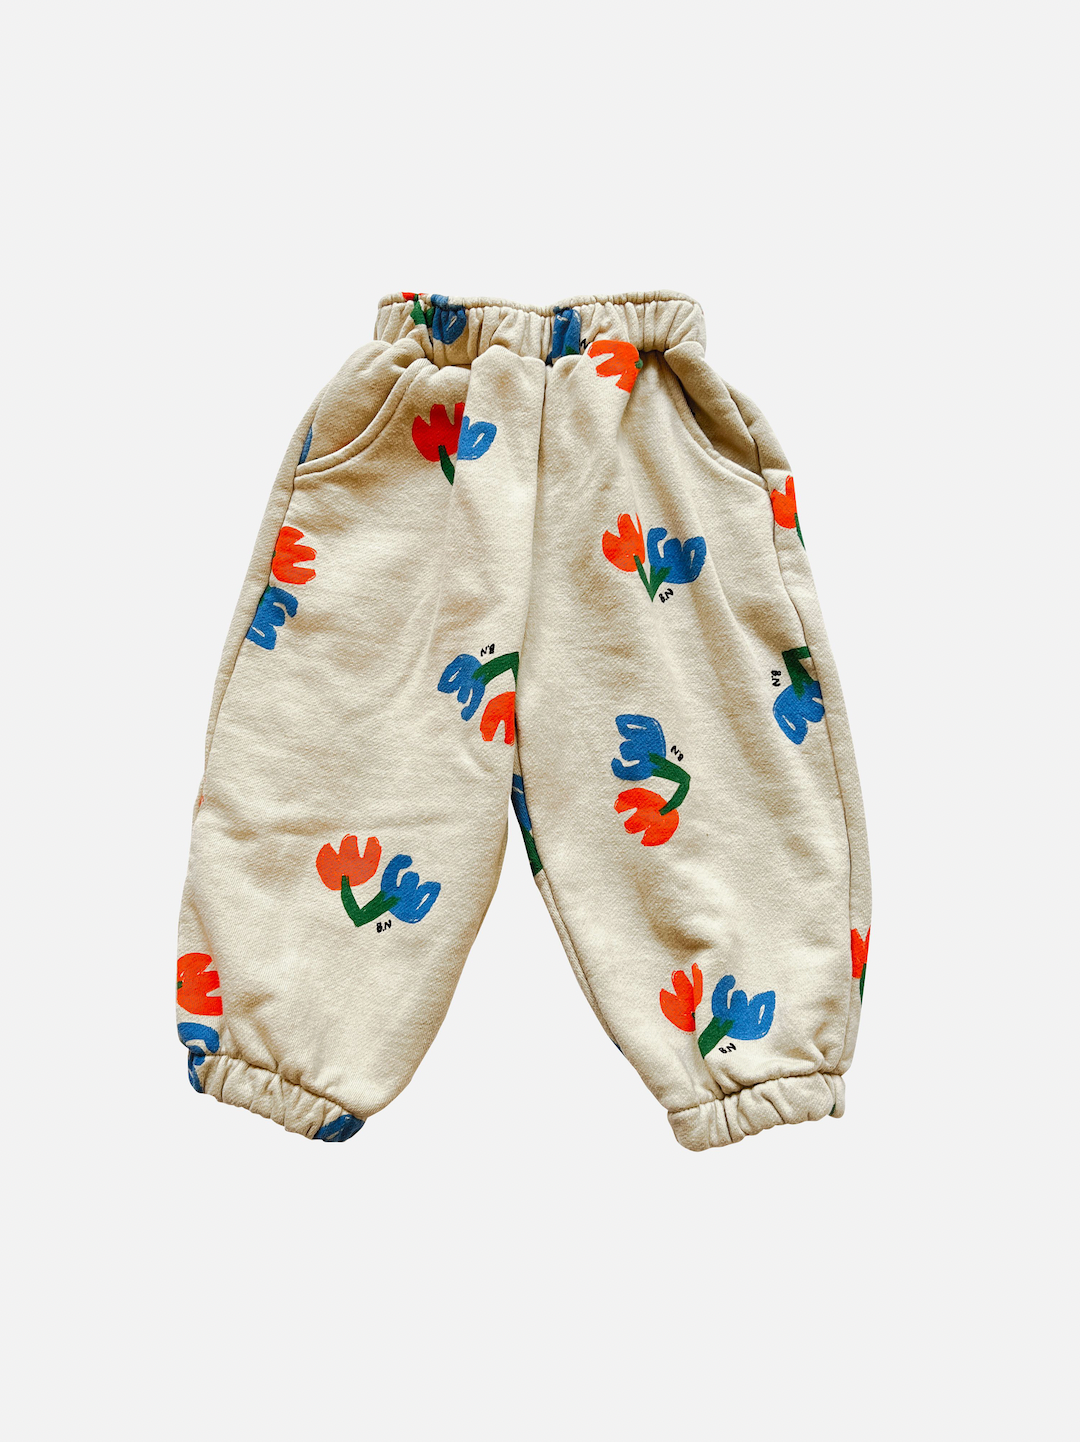 Pair of kids' sweatpants with blue and red flowers printed on ecru background